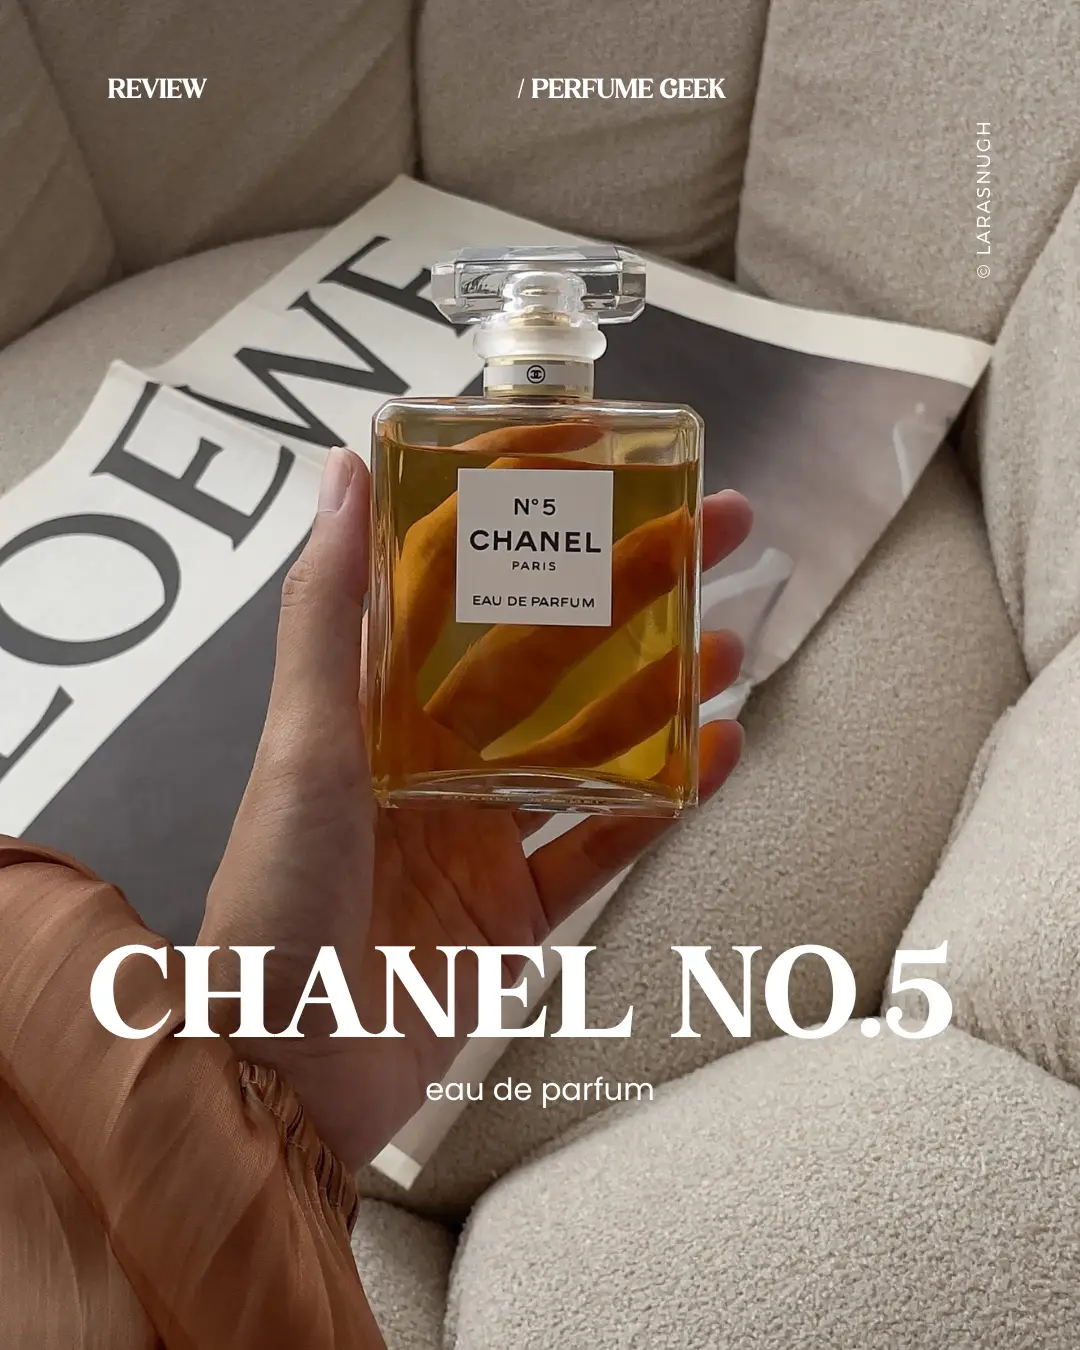 History of Famous Perfumes - The Stories Behind Chanel No 5, White